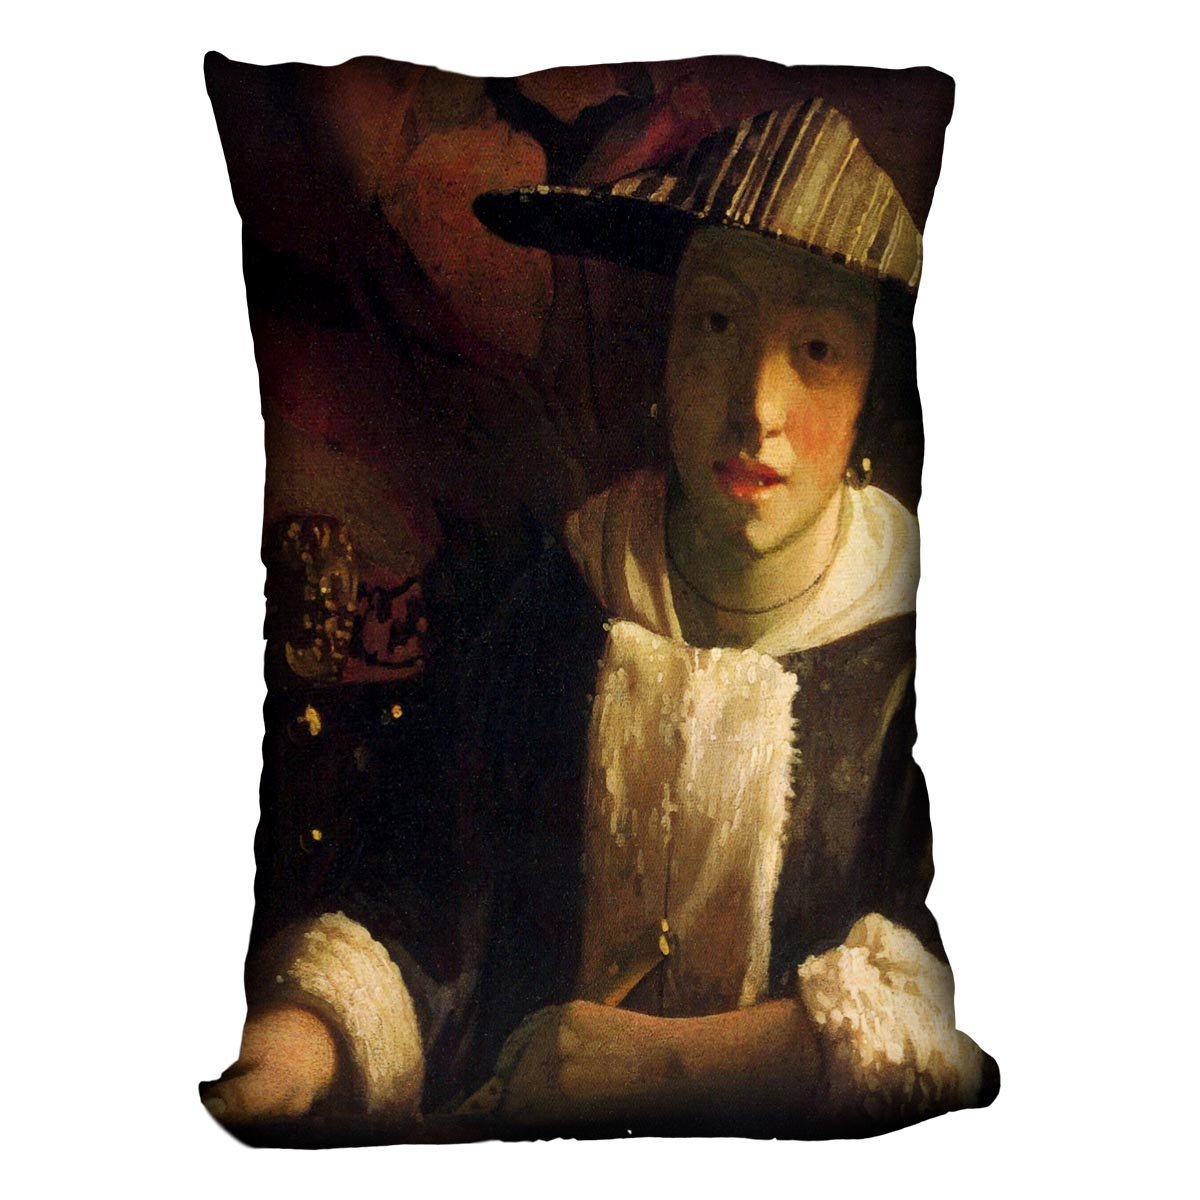 Girl with a flute by Vermeer Cushion